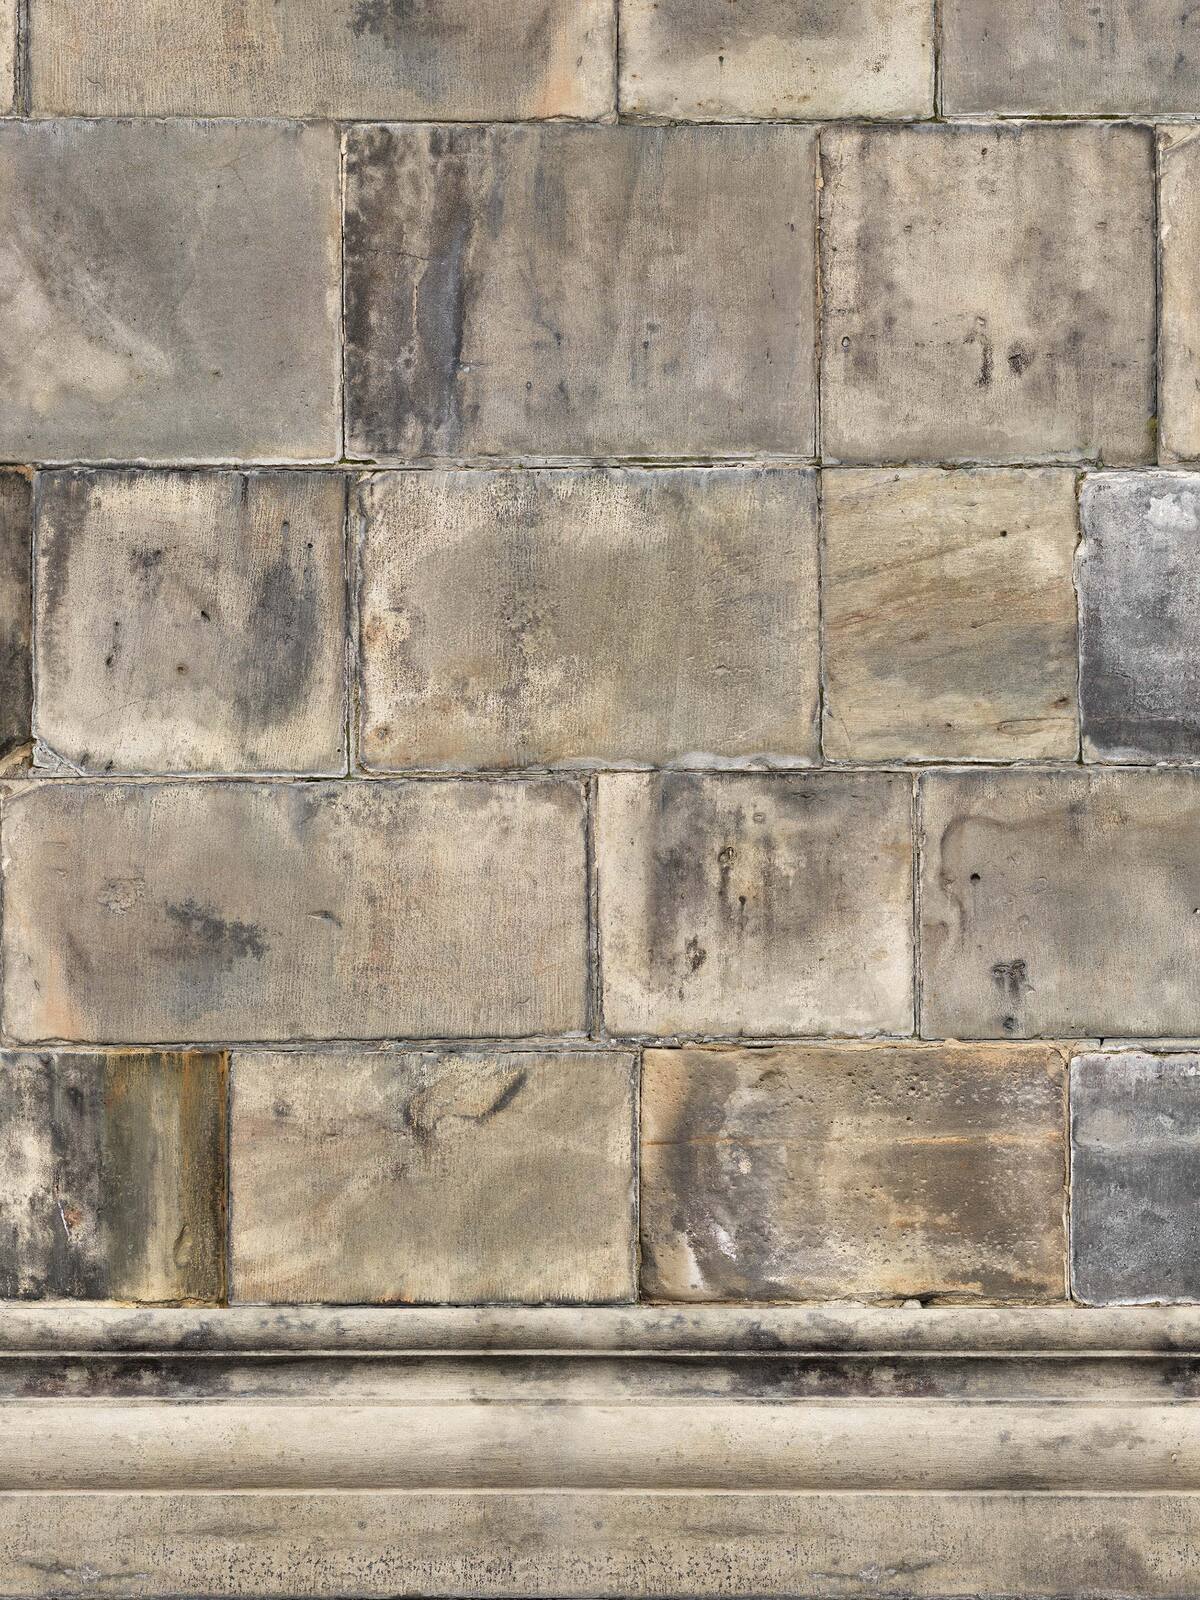 The photo wallpaper Sandstone Bricks depicts a beautifully patinated sandstone wall from Lund Cathedral.